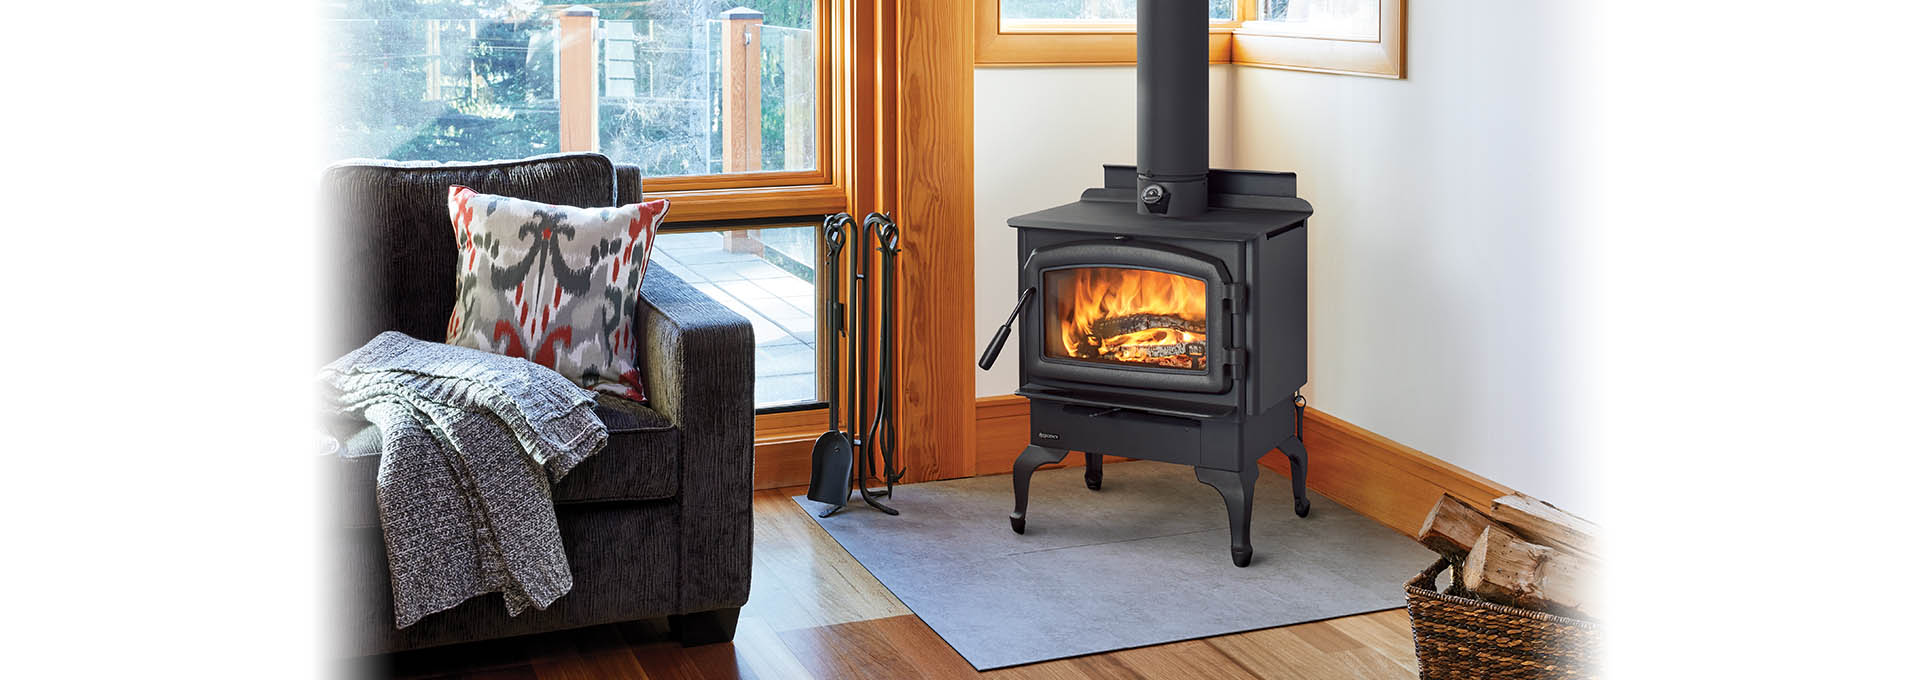 Upgrade Your Fireplace: Boost Efficiency with a High-Efficiency Wood Burning Fireplace Insert